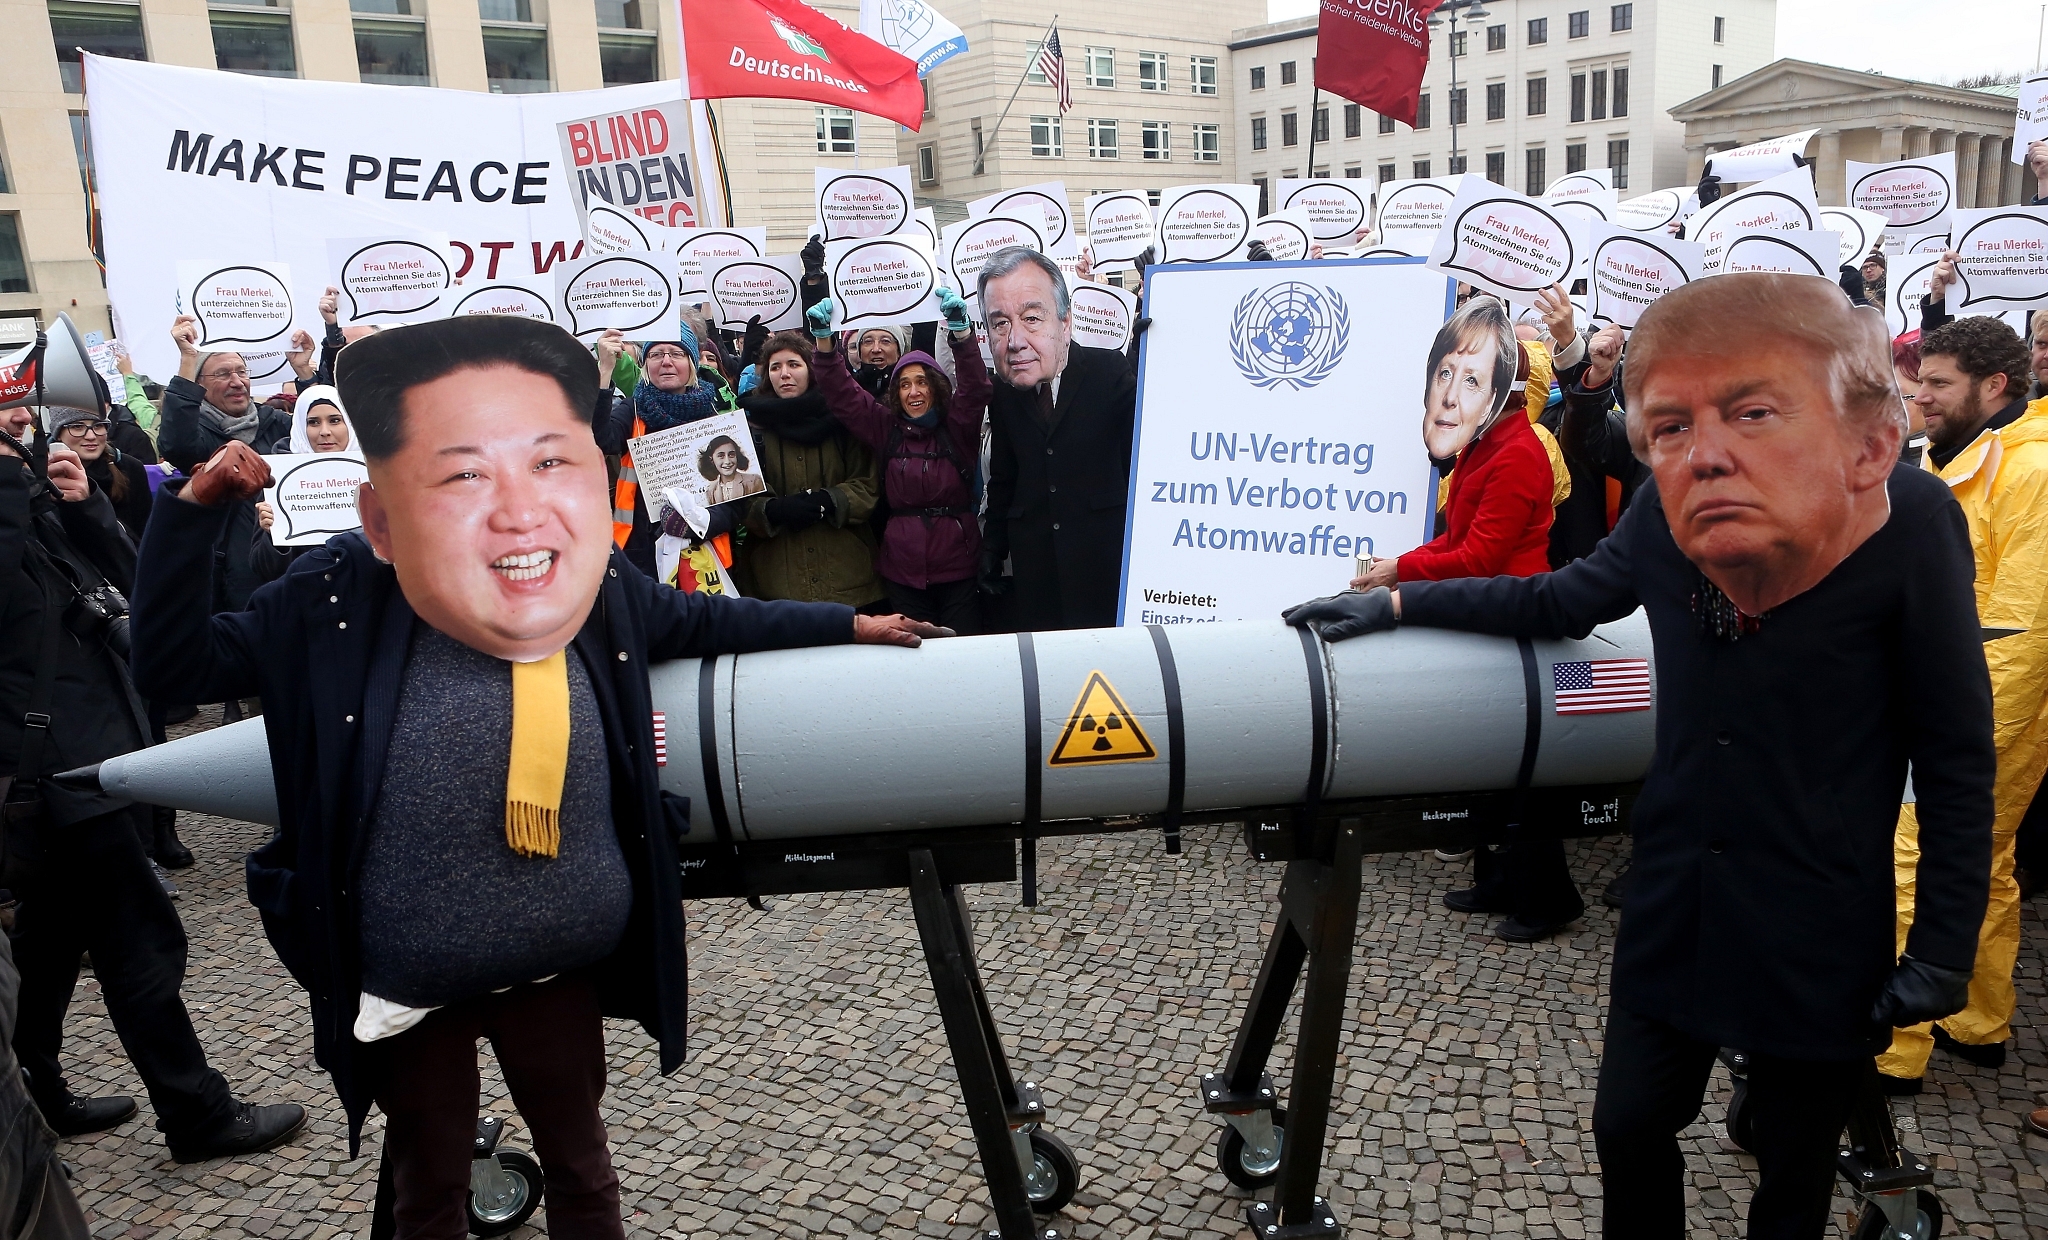 Activists in Berlin pose with masks of Donald Trump and Kim Jong-Un along with a model of a nuclear rocket in 2017 (Adam Berry/Getty Images)